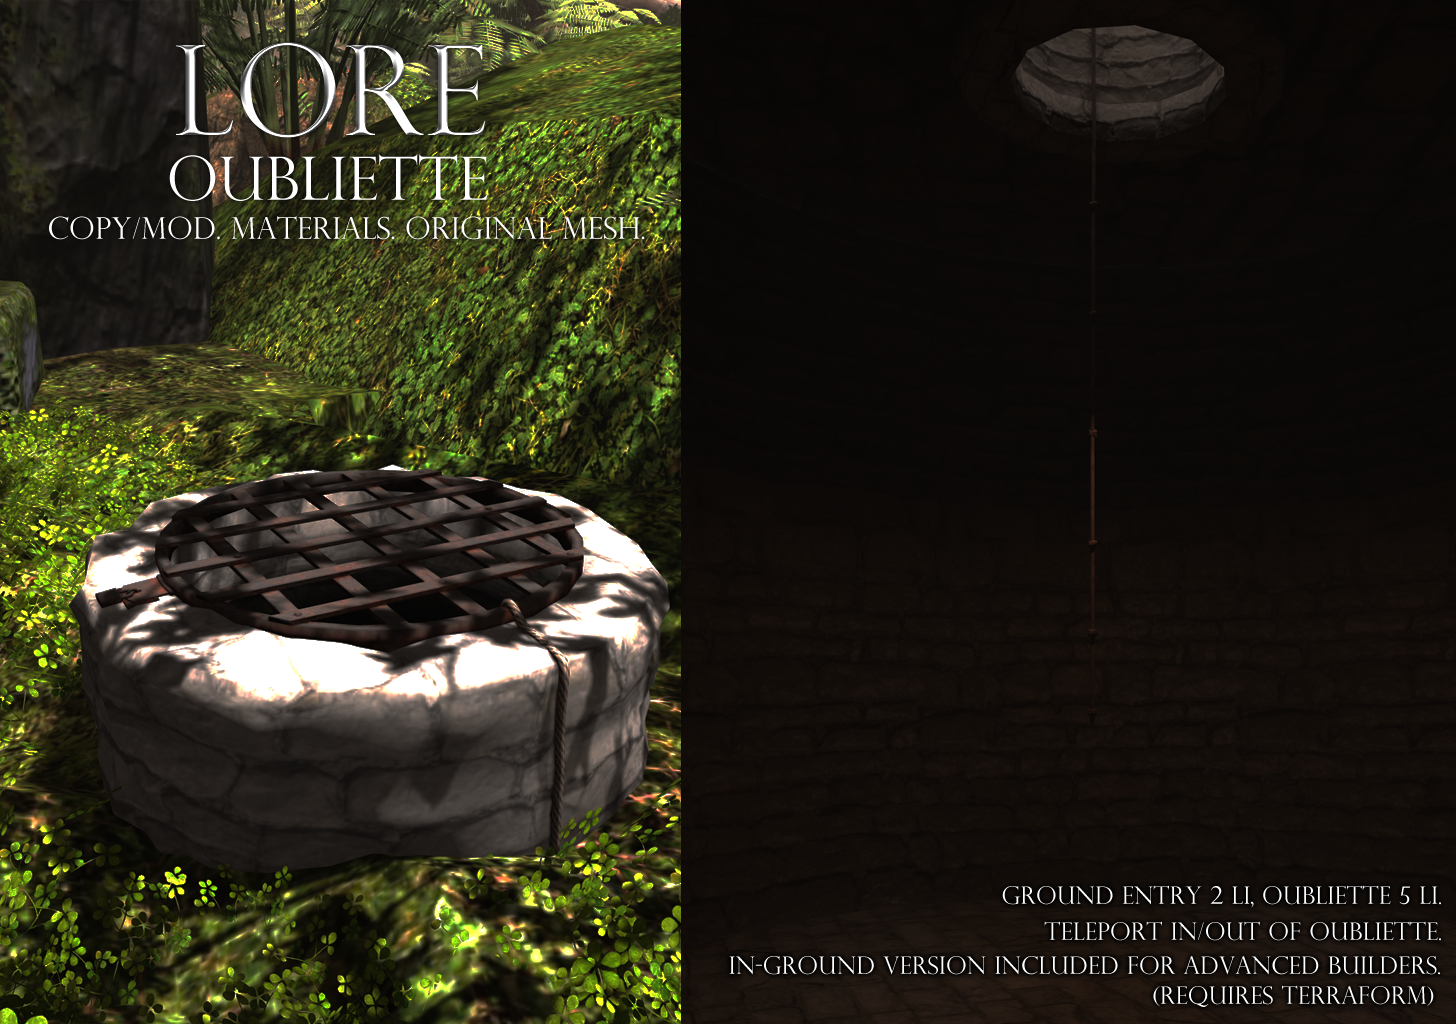 oubliette ad